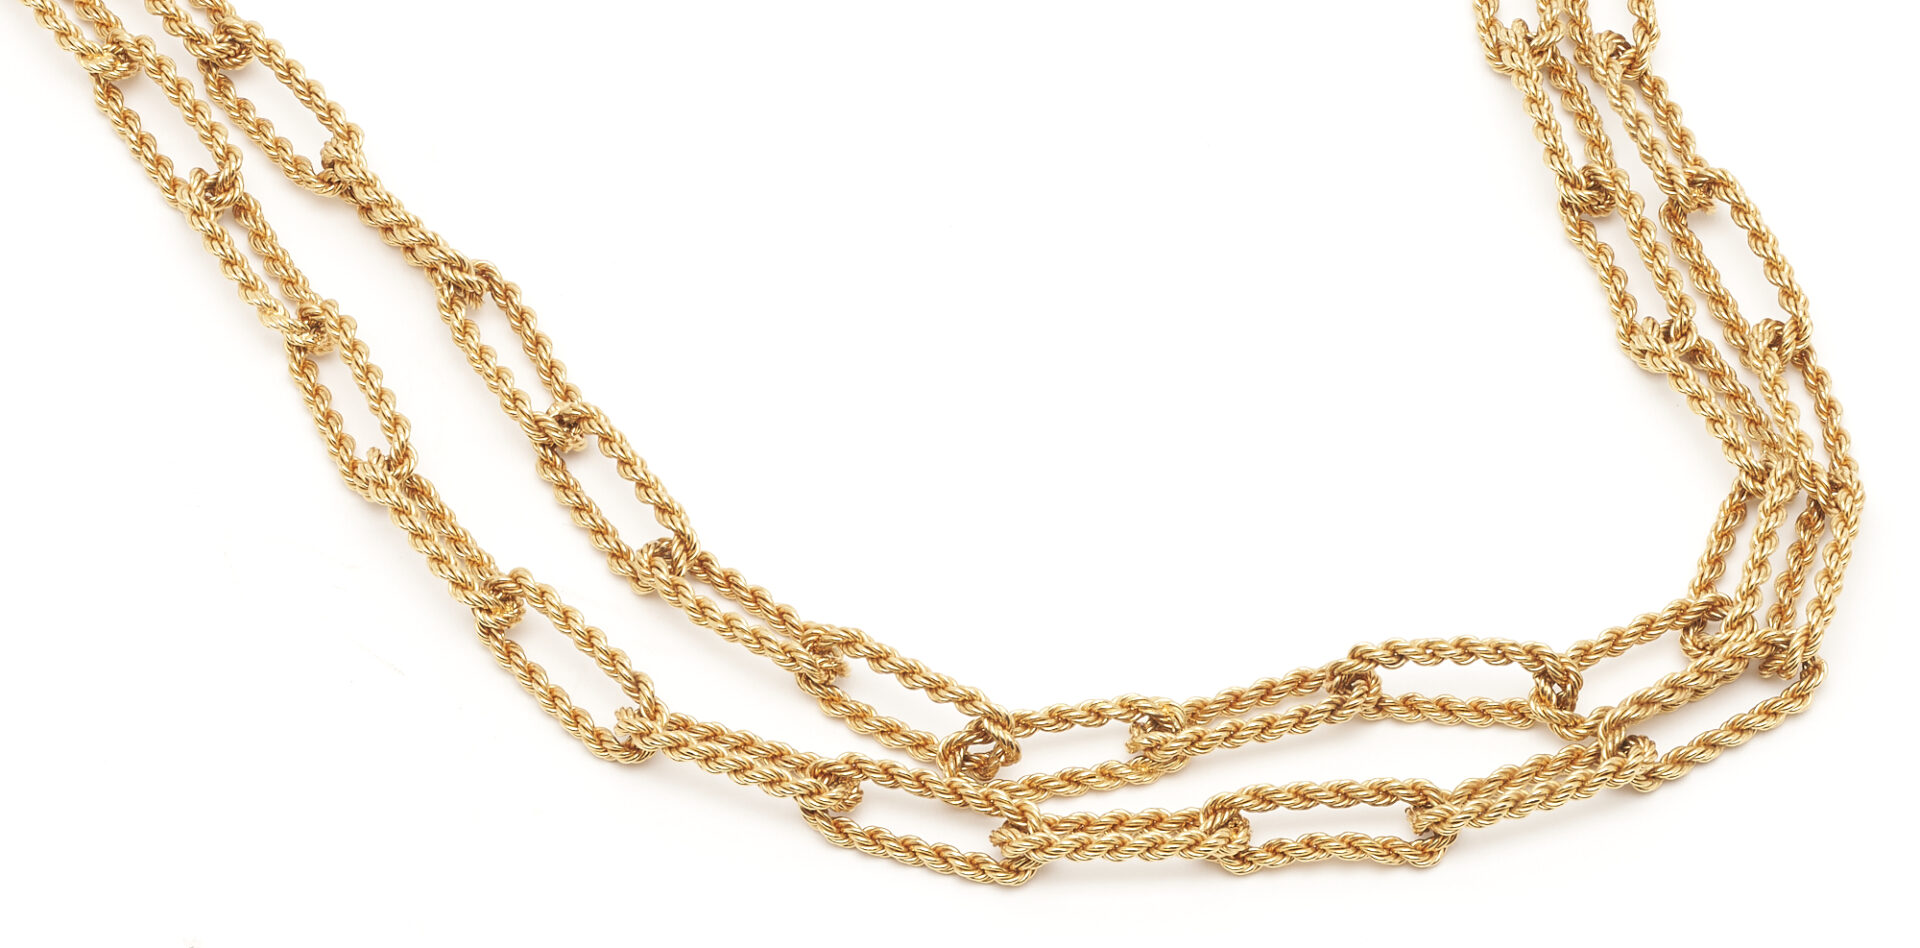 Lot 46: 18K Gold Rope Link Chain Necklace